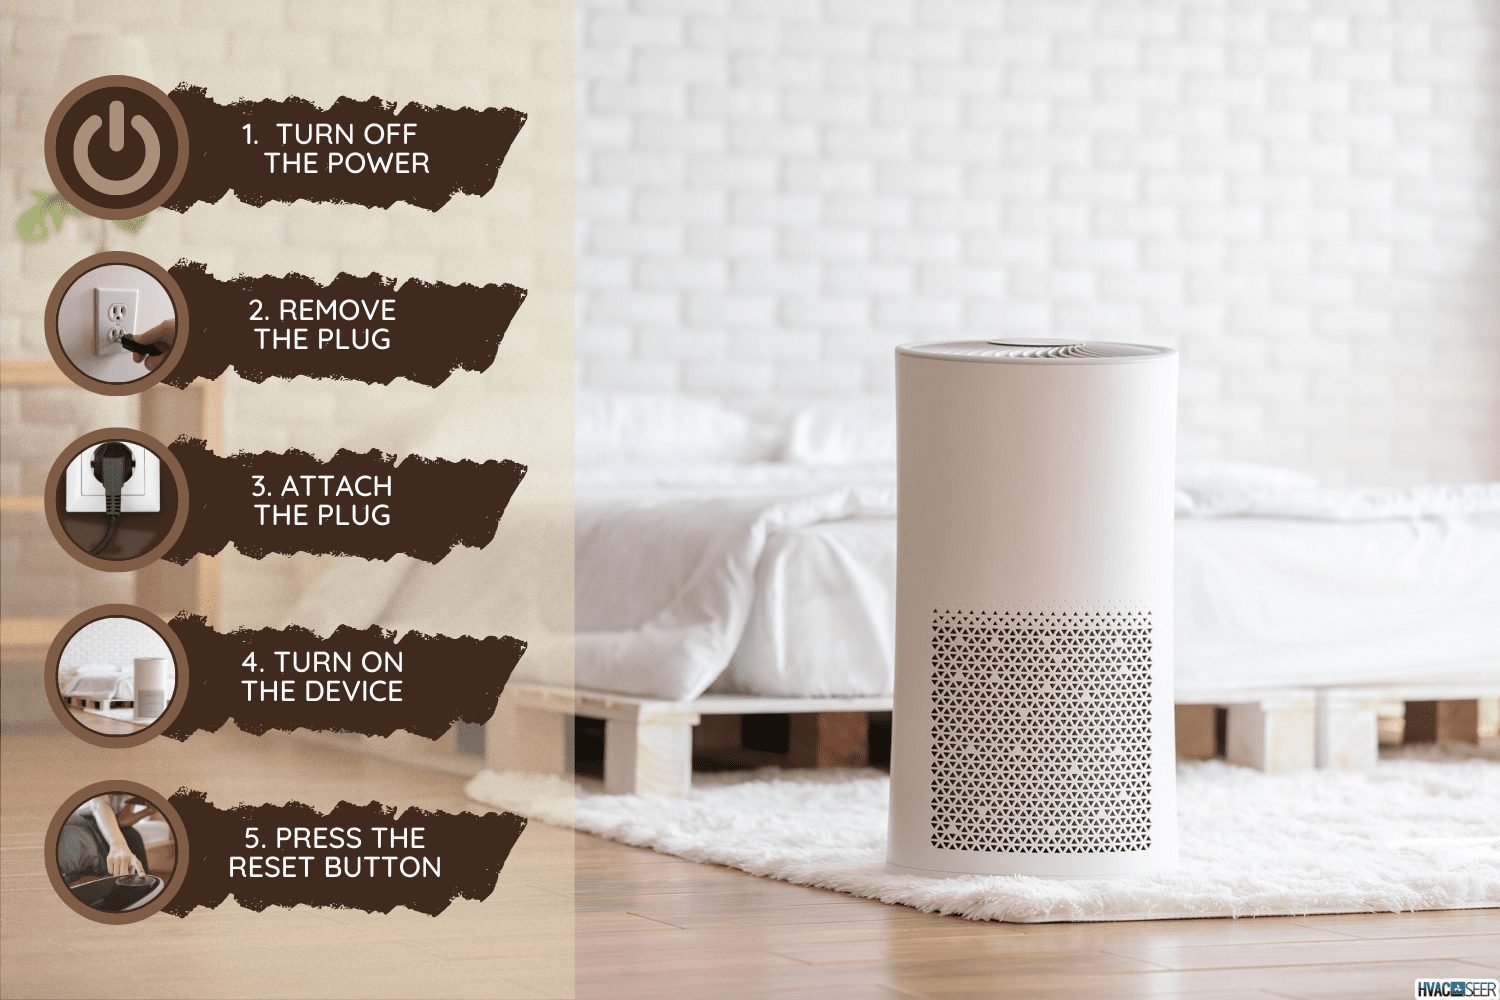 Air purifier in cozy white bedroom for filter and cleaning removing dust PM2.5 HEPA and virus in home,for fresh air and healthy Wellness life.Health care Air Pollution Concept - How To Reset Bissell Air Purifier [Quickly & Easily]